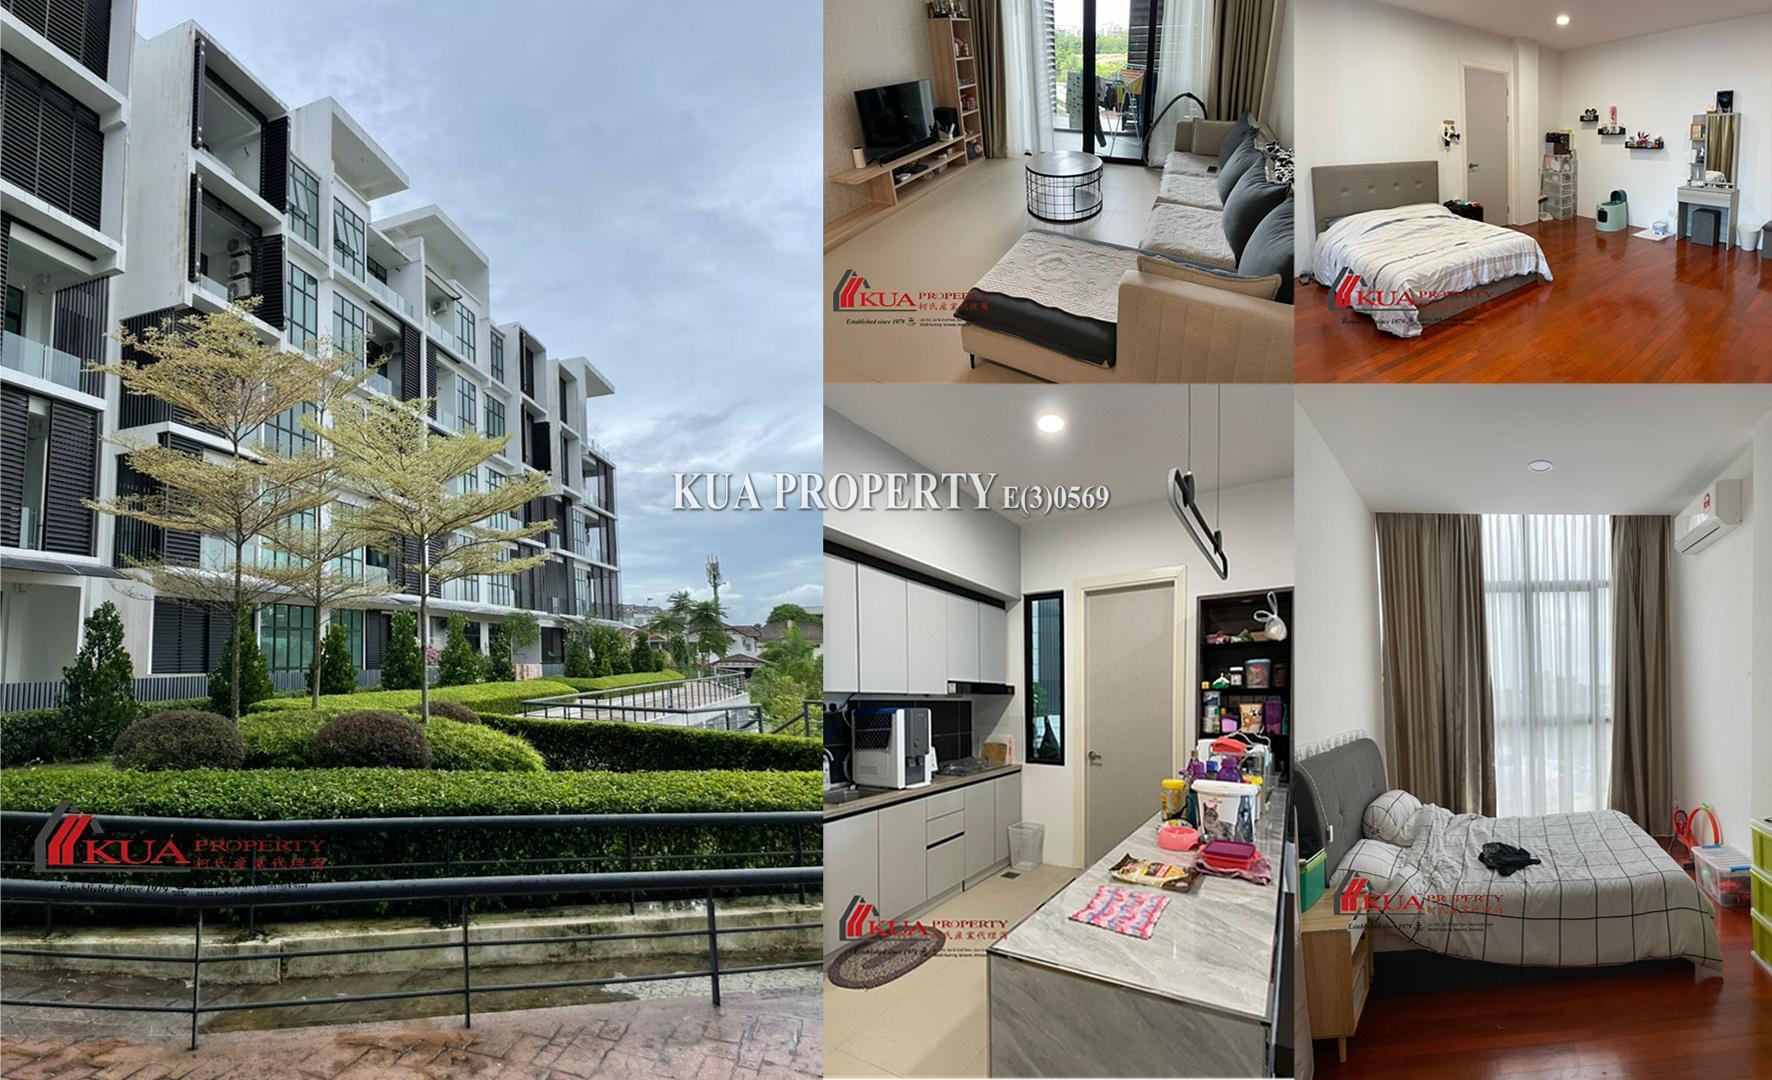 72 Residence Condominium FOR SALE! at Jln Song (Behind Upwell Supermarket)